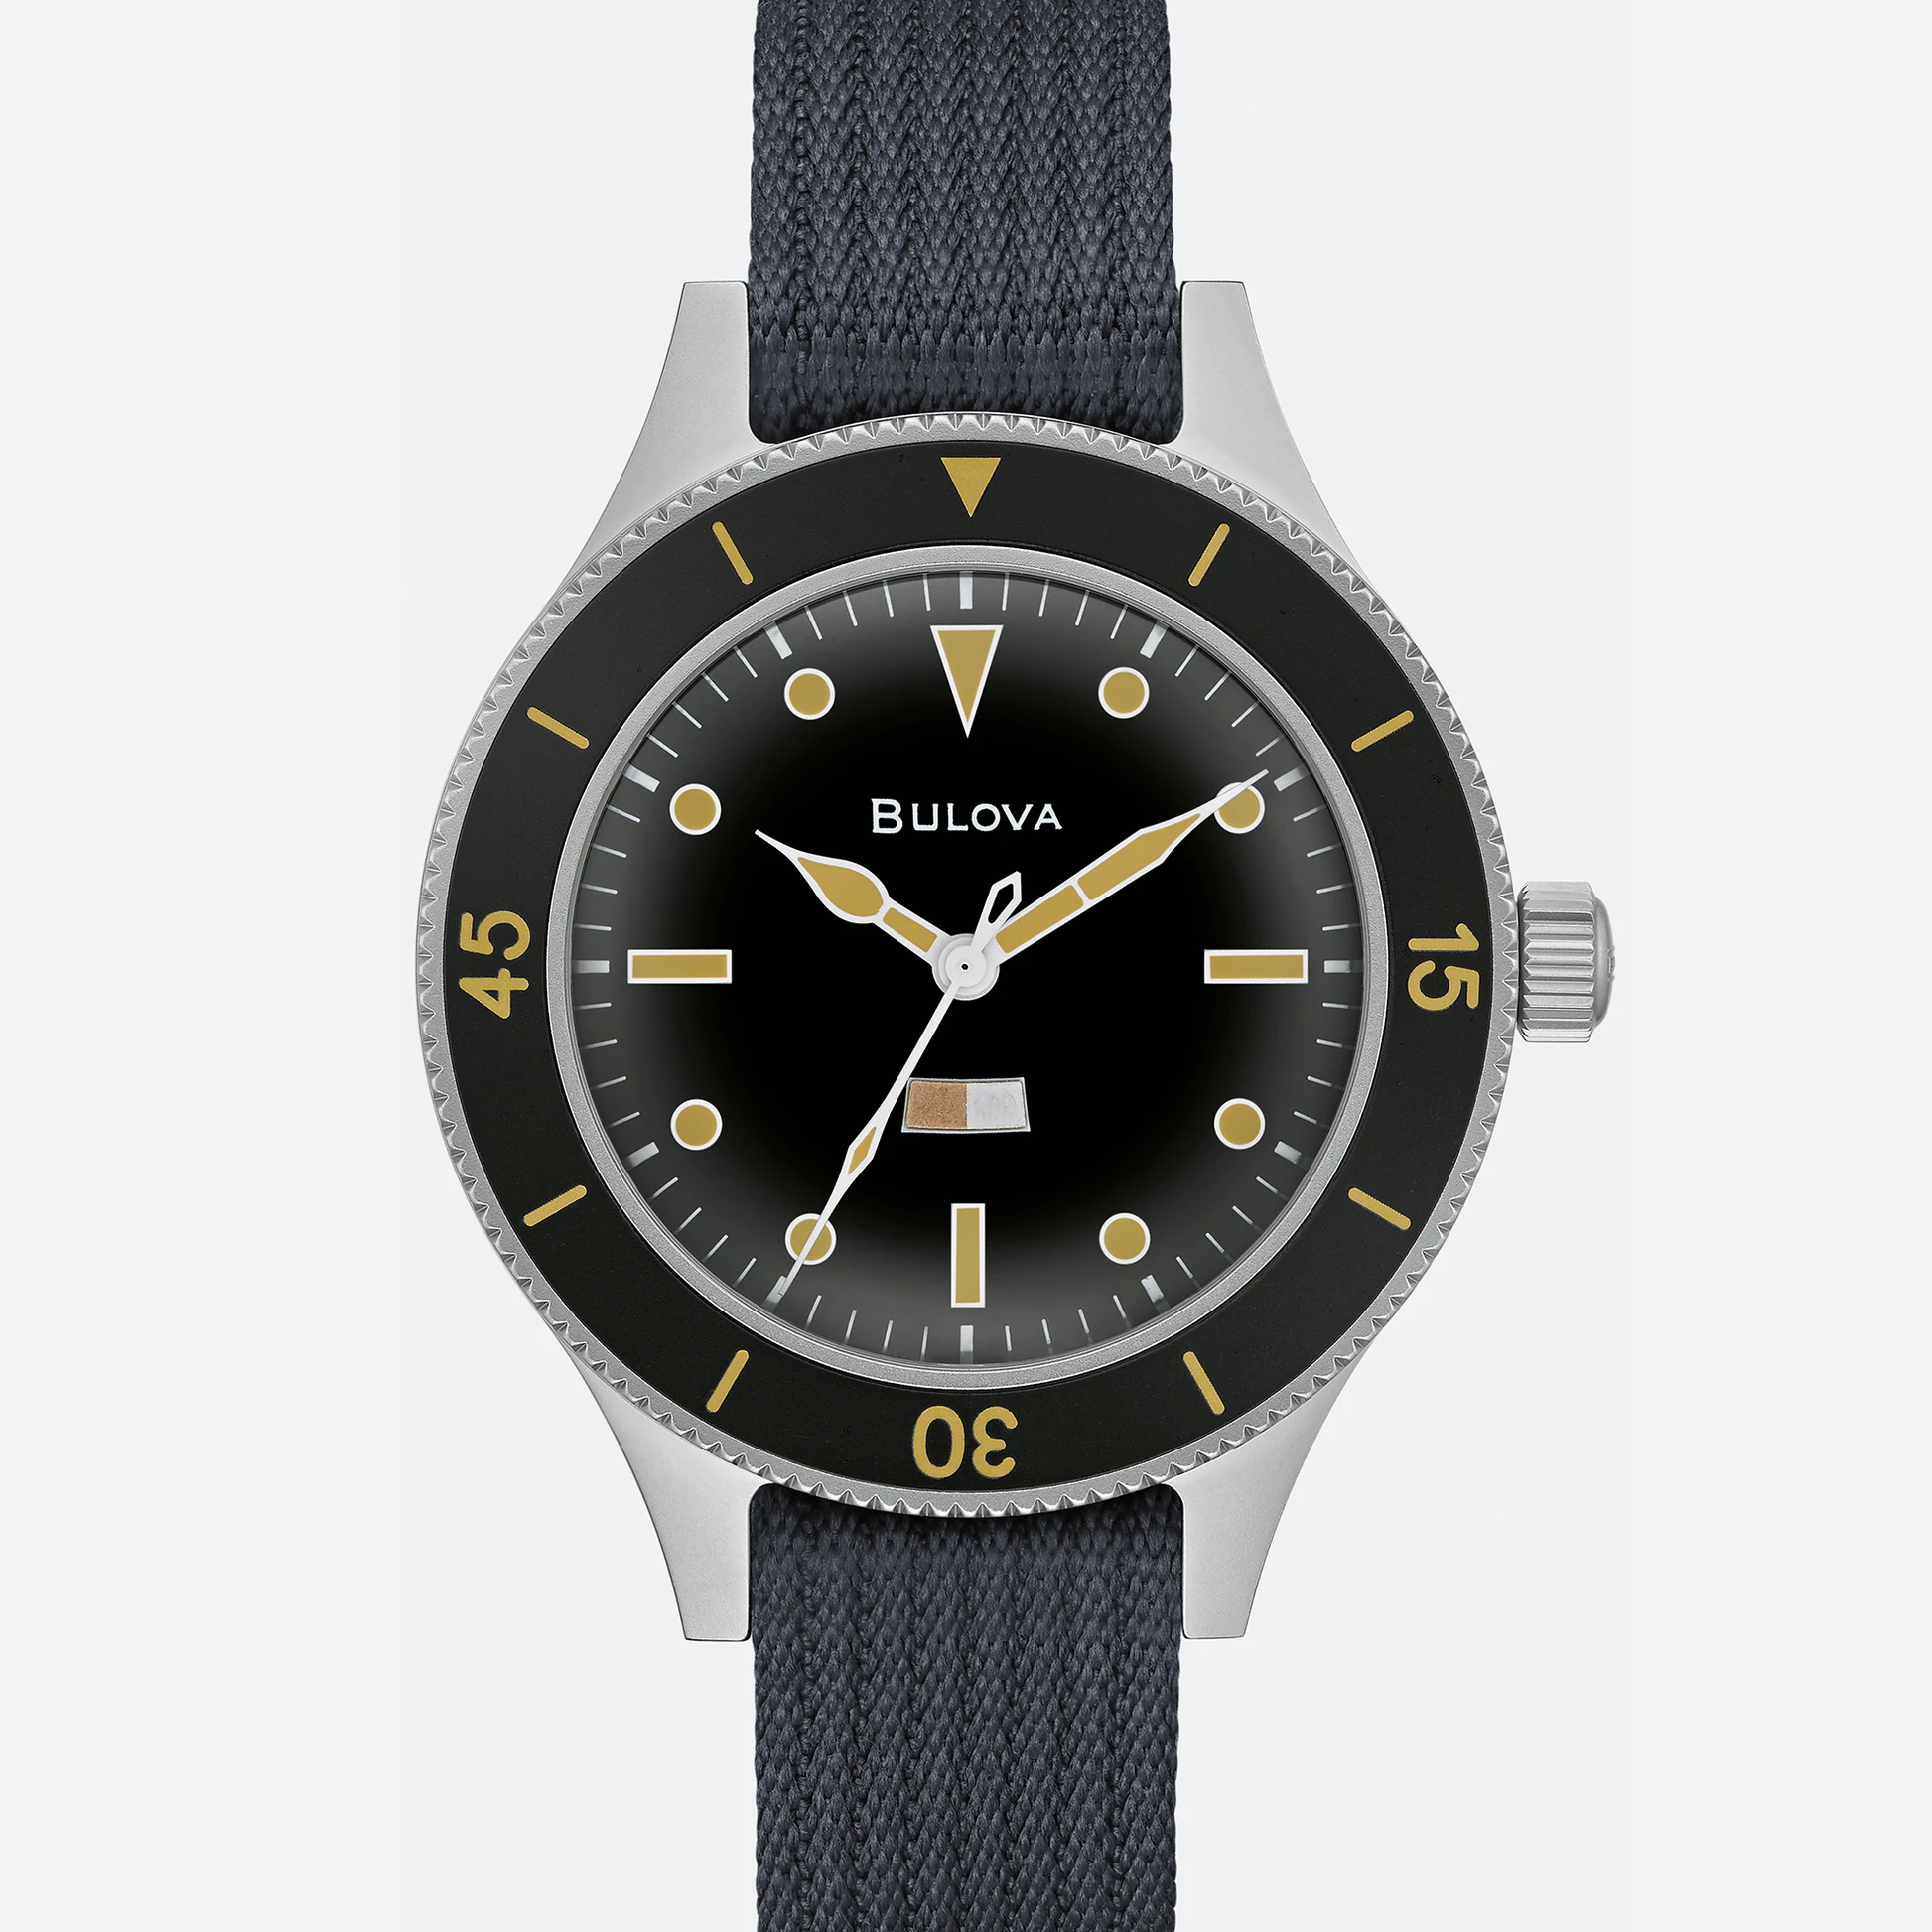 Bulova’s new MIL-SHIPS-W-2181 Submersible Re-Edition BULOVA%2BArchive%2BSeries%2BMIL-SHIPS-W-2181%2BSubmersible%2BRE-EDITION%2B09